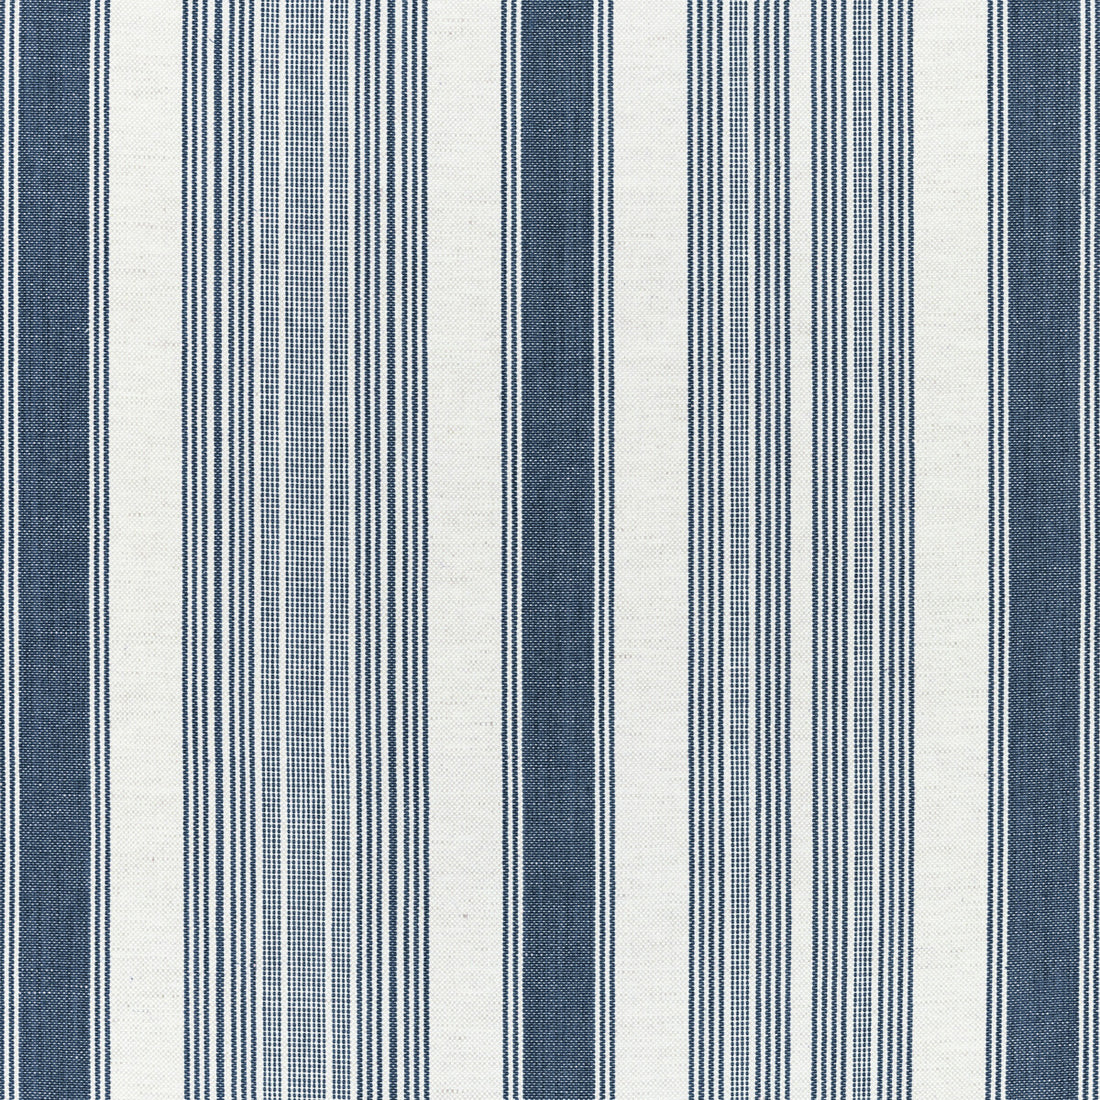 Tablada Stripe fabric in indigo color - pattern 2021102.50.0 - by Lee Jofa in the Triana Weaves collection